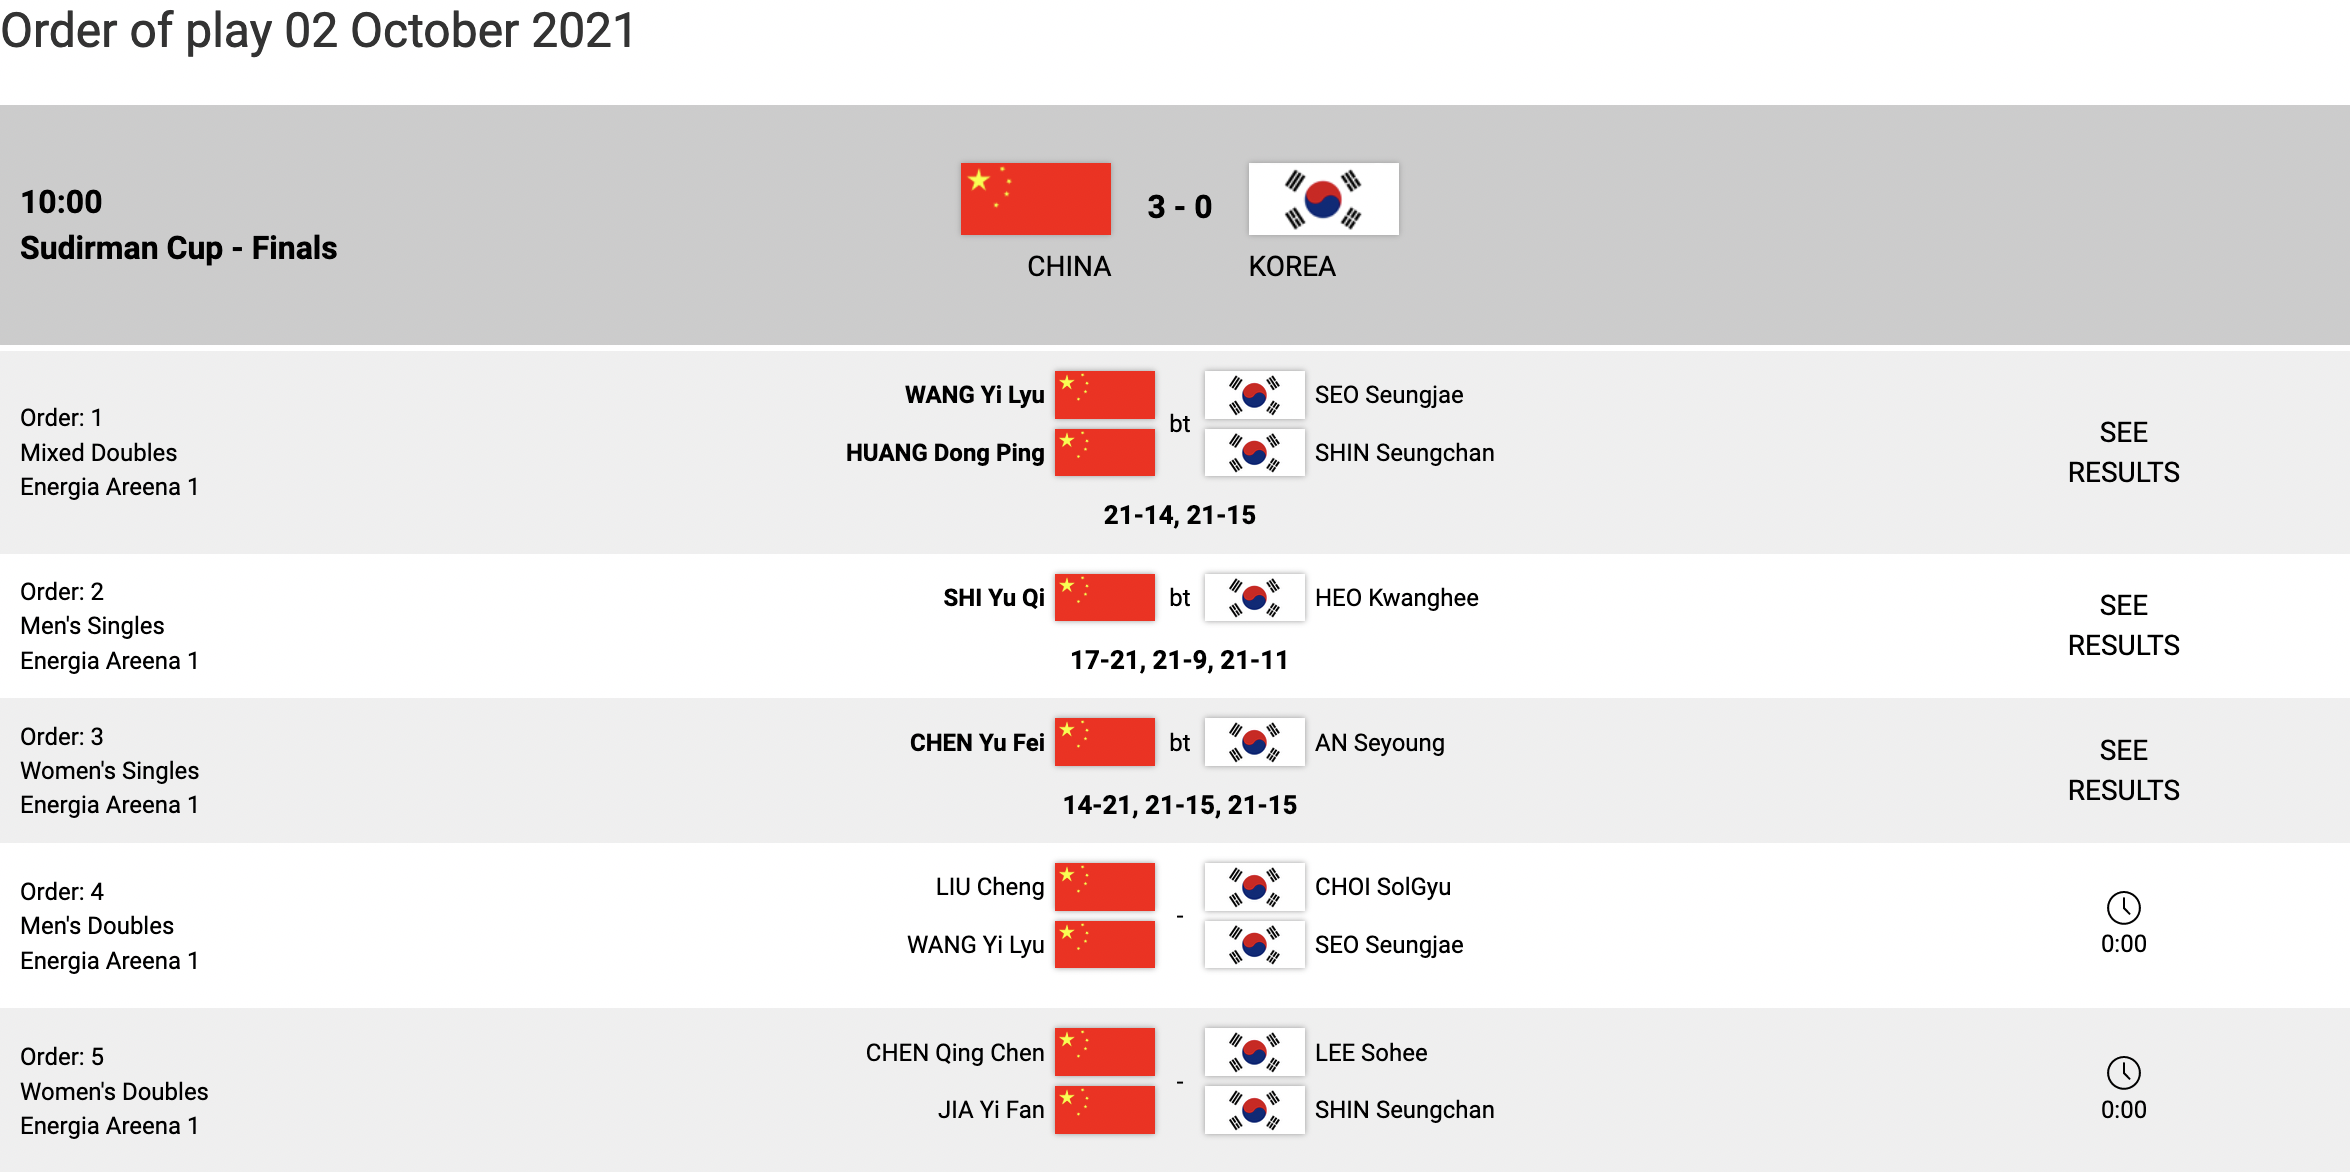 Sudirman cup results